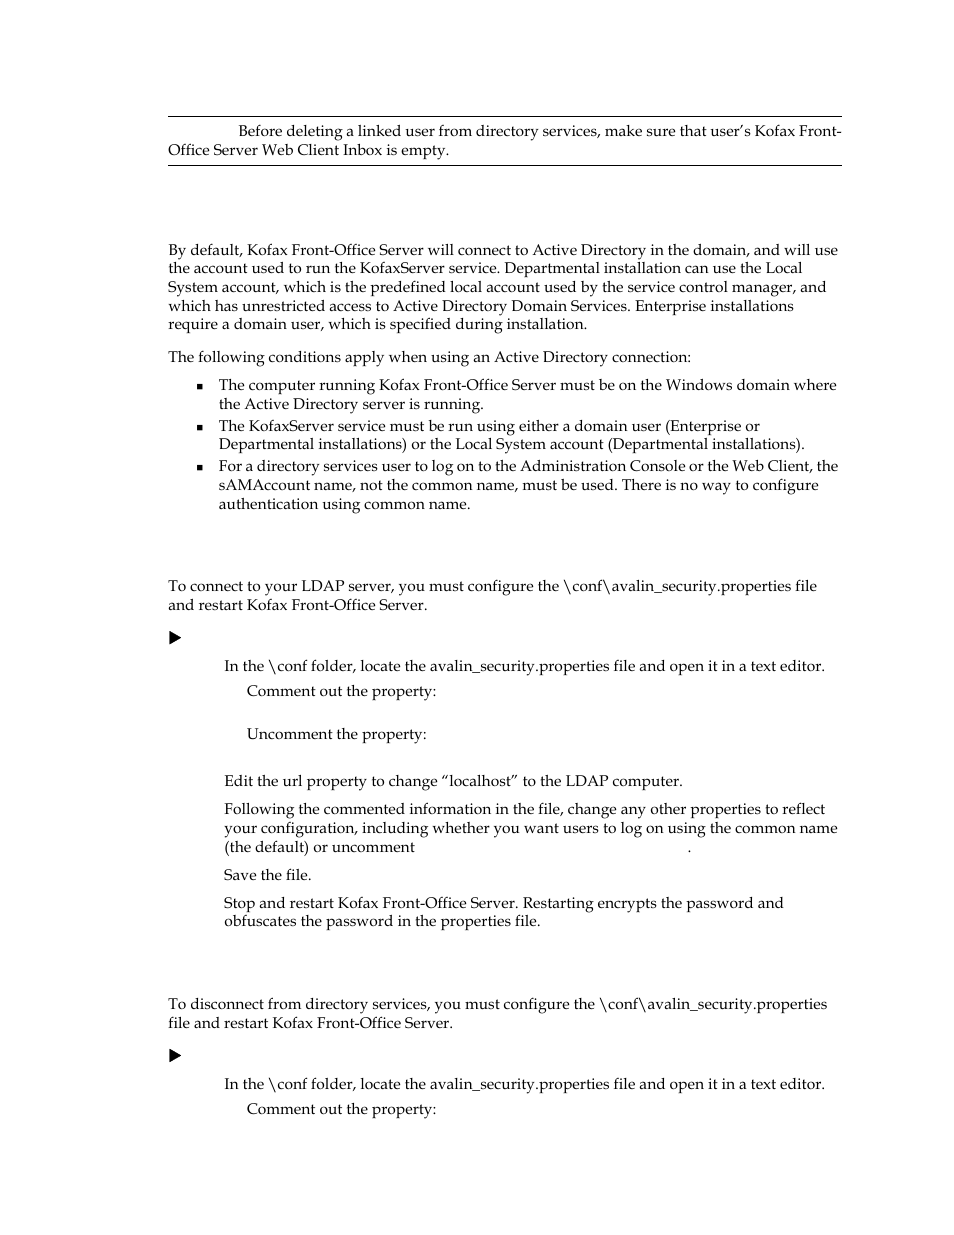 Connecting to active directory, Connecting to ldap, To disconnect from directory service | E, see, To disconnect from directory, Service, If you | Kofax Front-Office Server 3.0 User Manual | Page 13 / 64